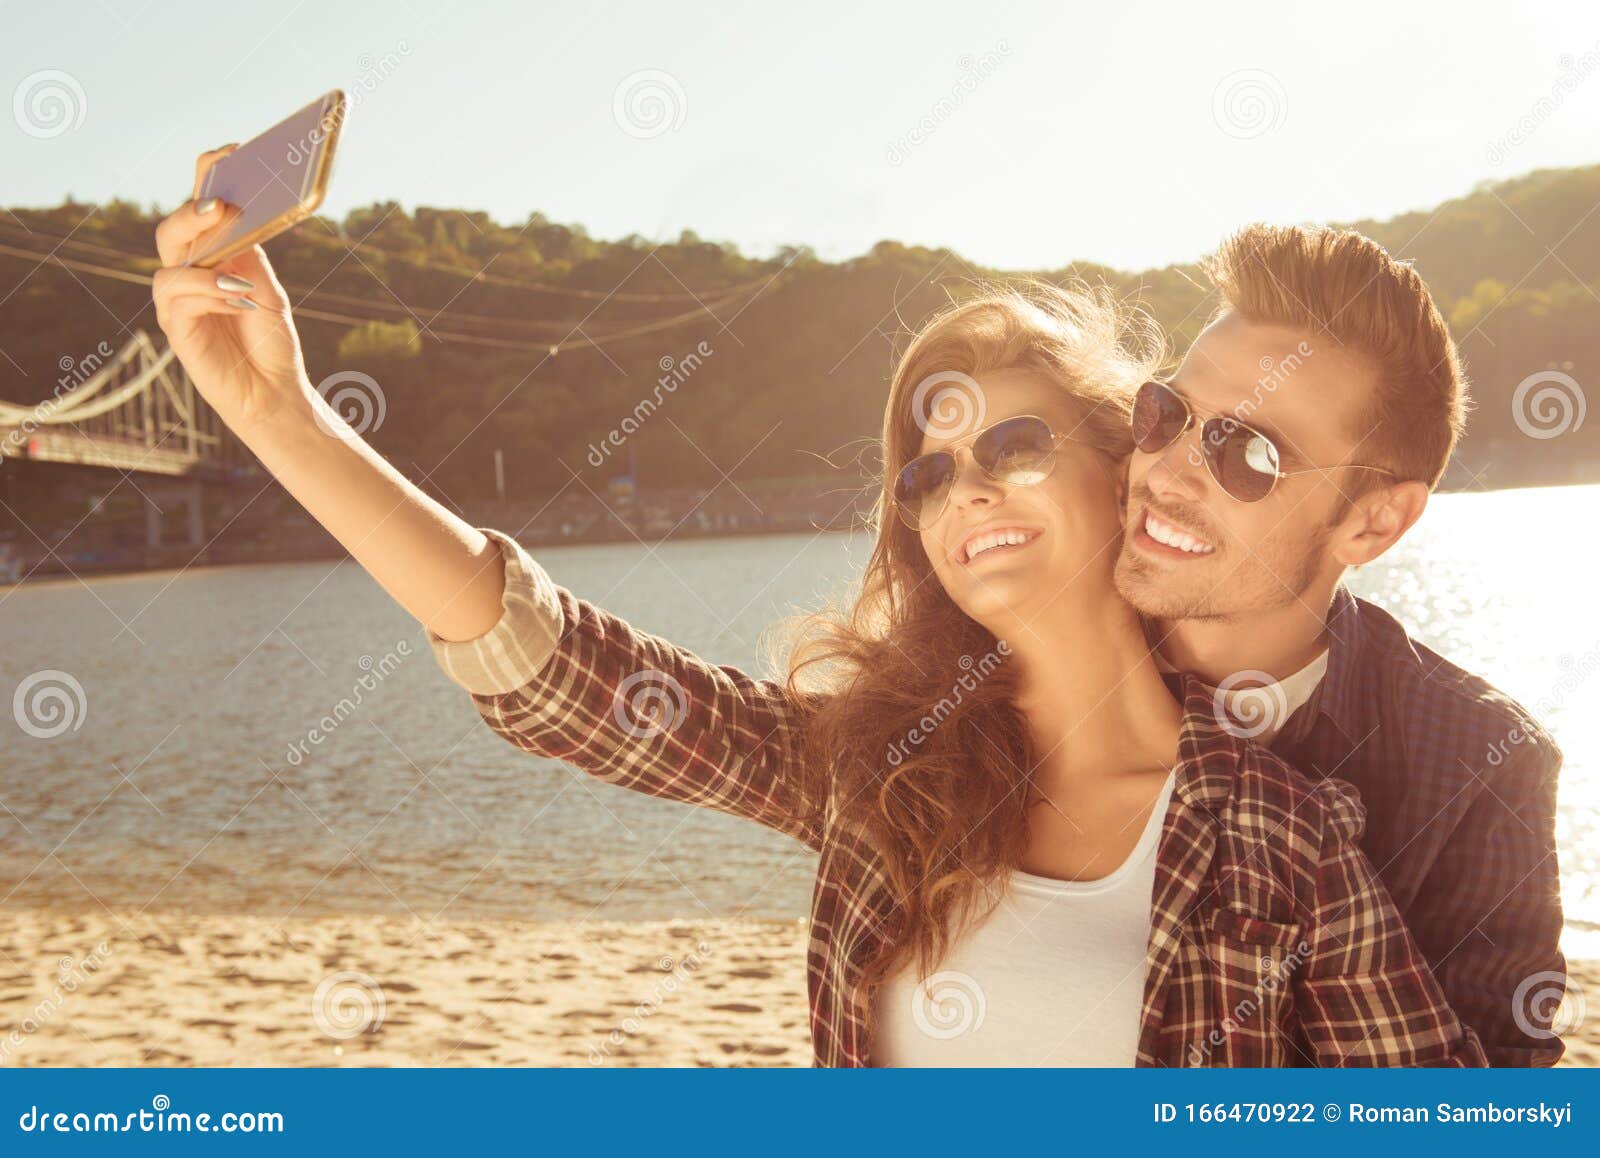 Couple in Love Making Selfie Photo on the Beach Stock Photo ...